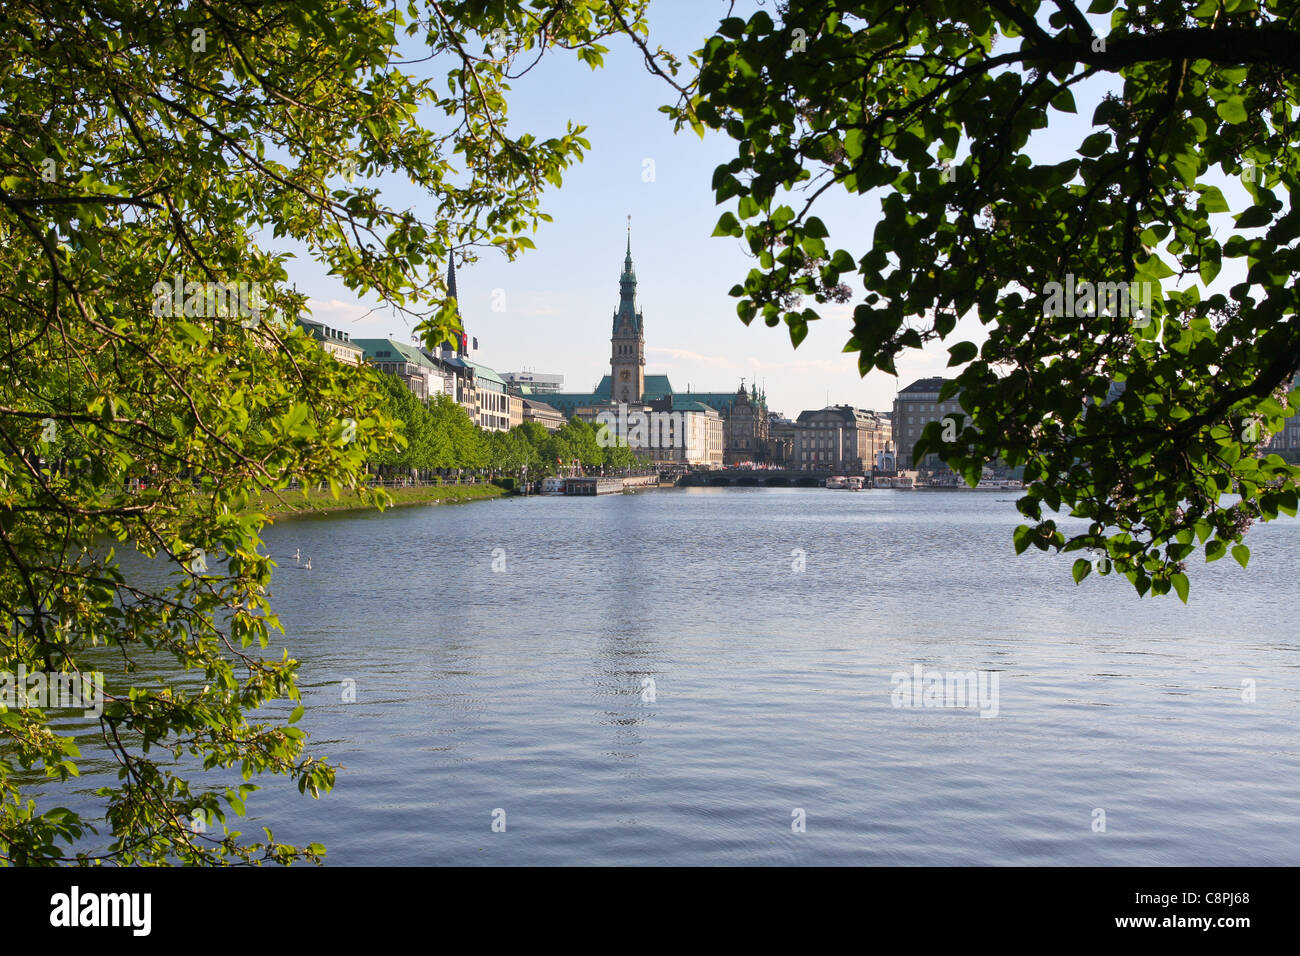 View of the Alster Lake in Hamburg, Germany Stock Photo